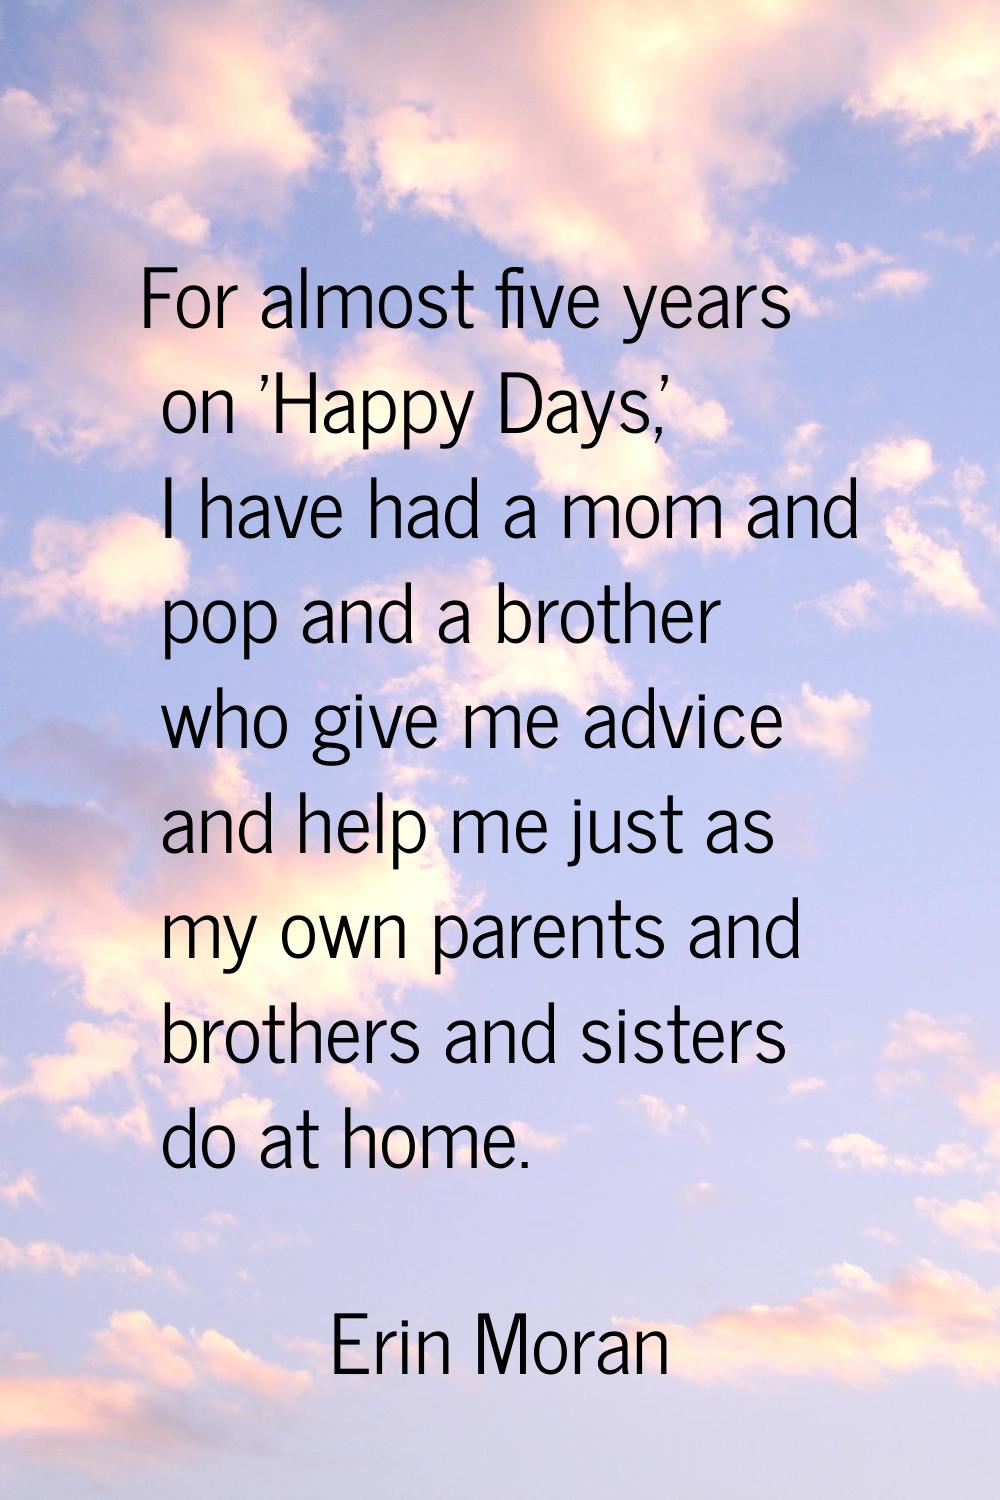 For almost five years on 'Happy Days,' I have had a mom and pop and a brother who give me advice an